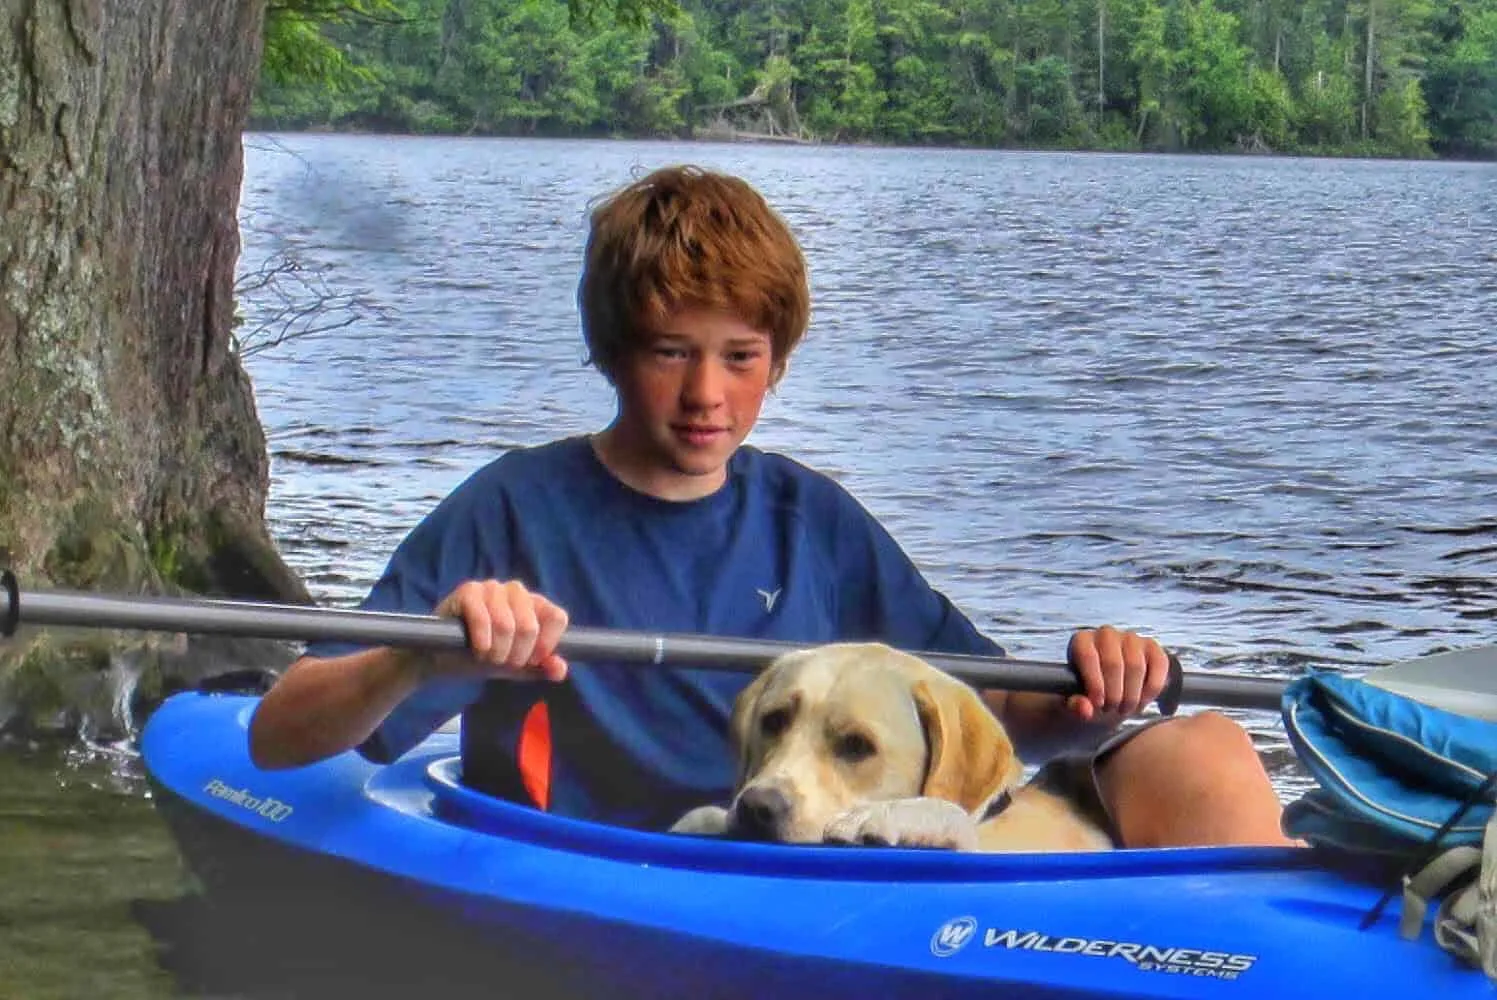 A boy and a dog in a blue kayak on a peaceful lake.